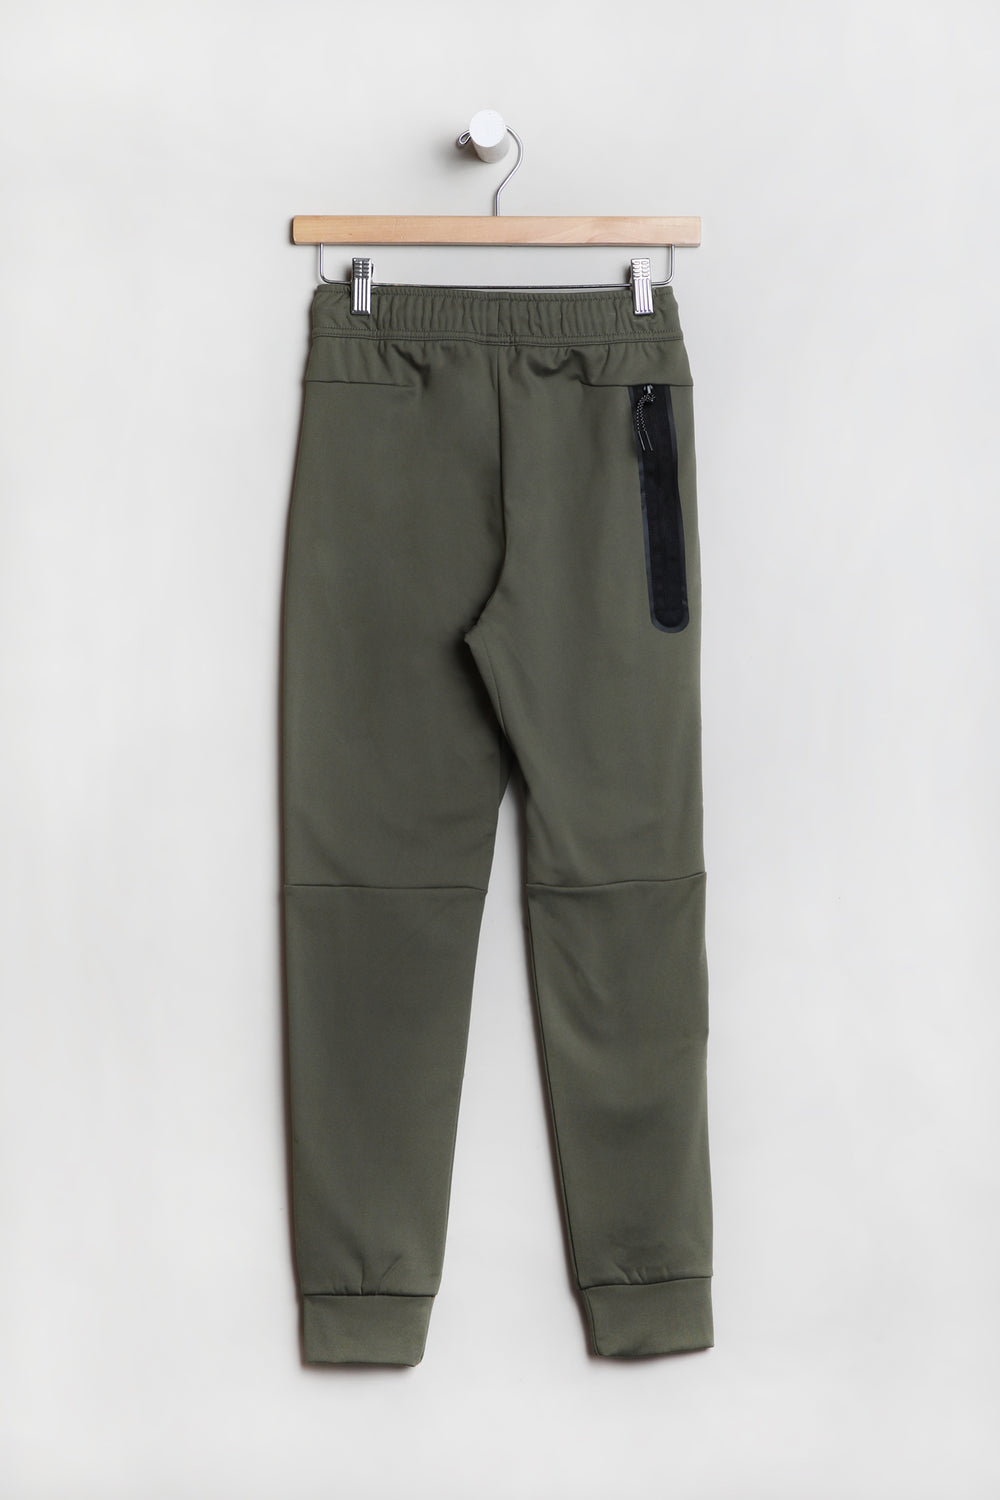 West49 Youth Power Soft Fleece Jogger West49 Youth Power Soft Fleece Jogger